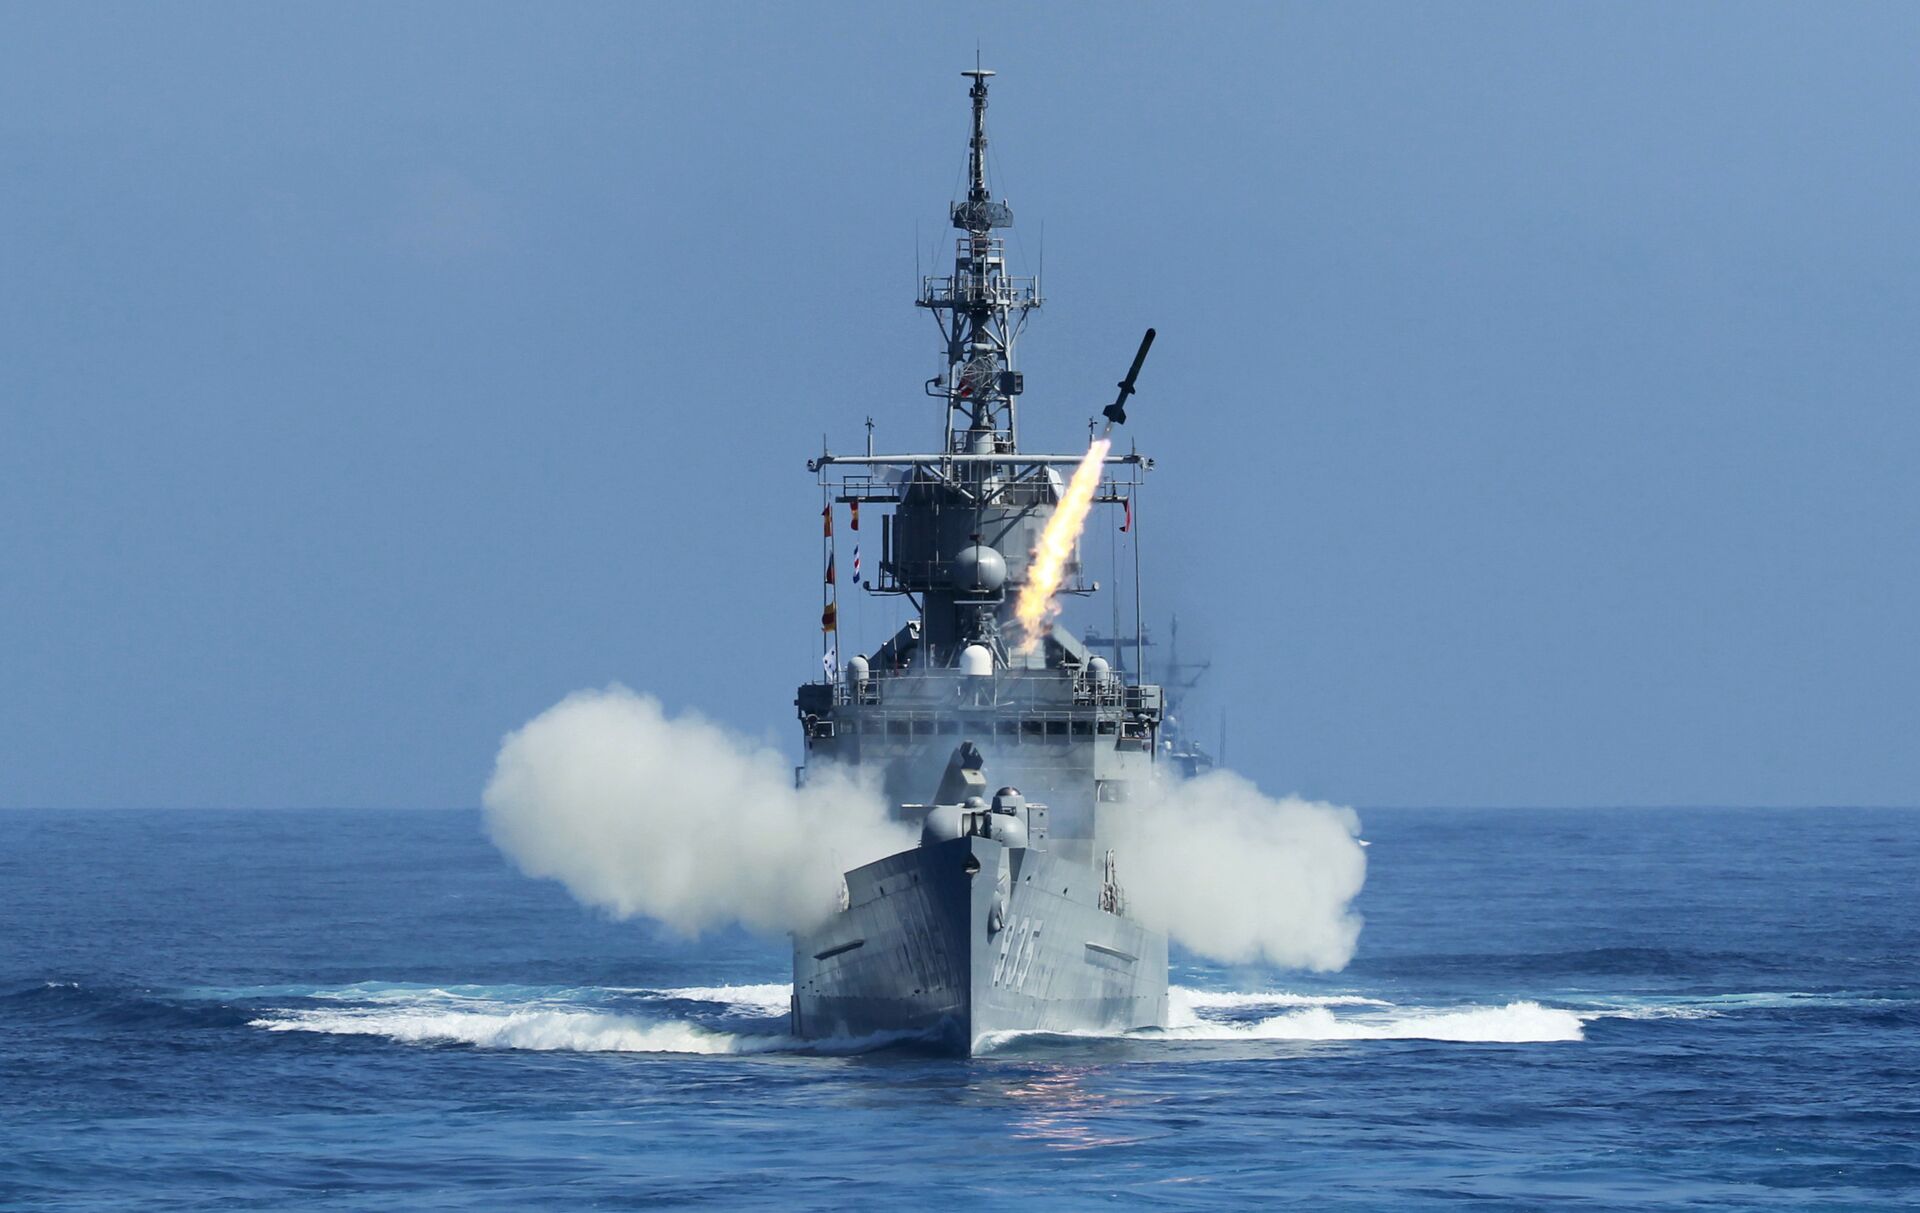 Taiwan Navy's Perry-class frigate launches an ASROC (anti-submarine rocket) during the annual Han Kuang military exercises. - Sputnik International, 1920, 07.06.2022